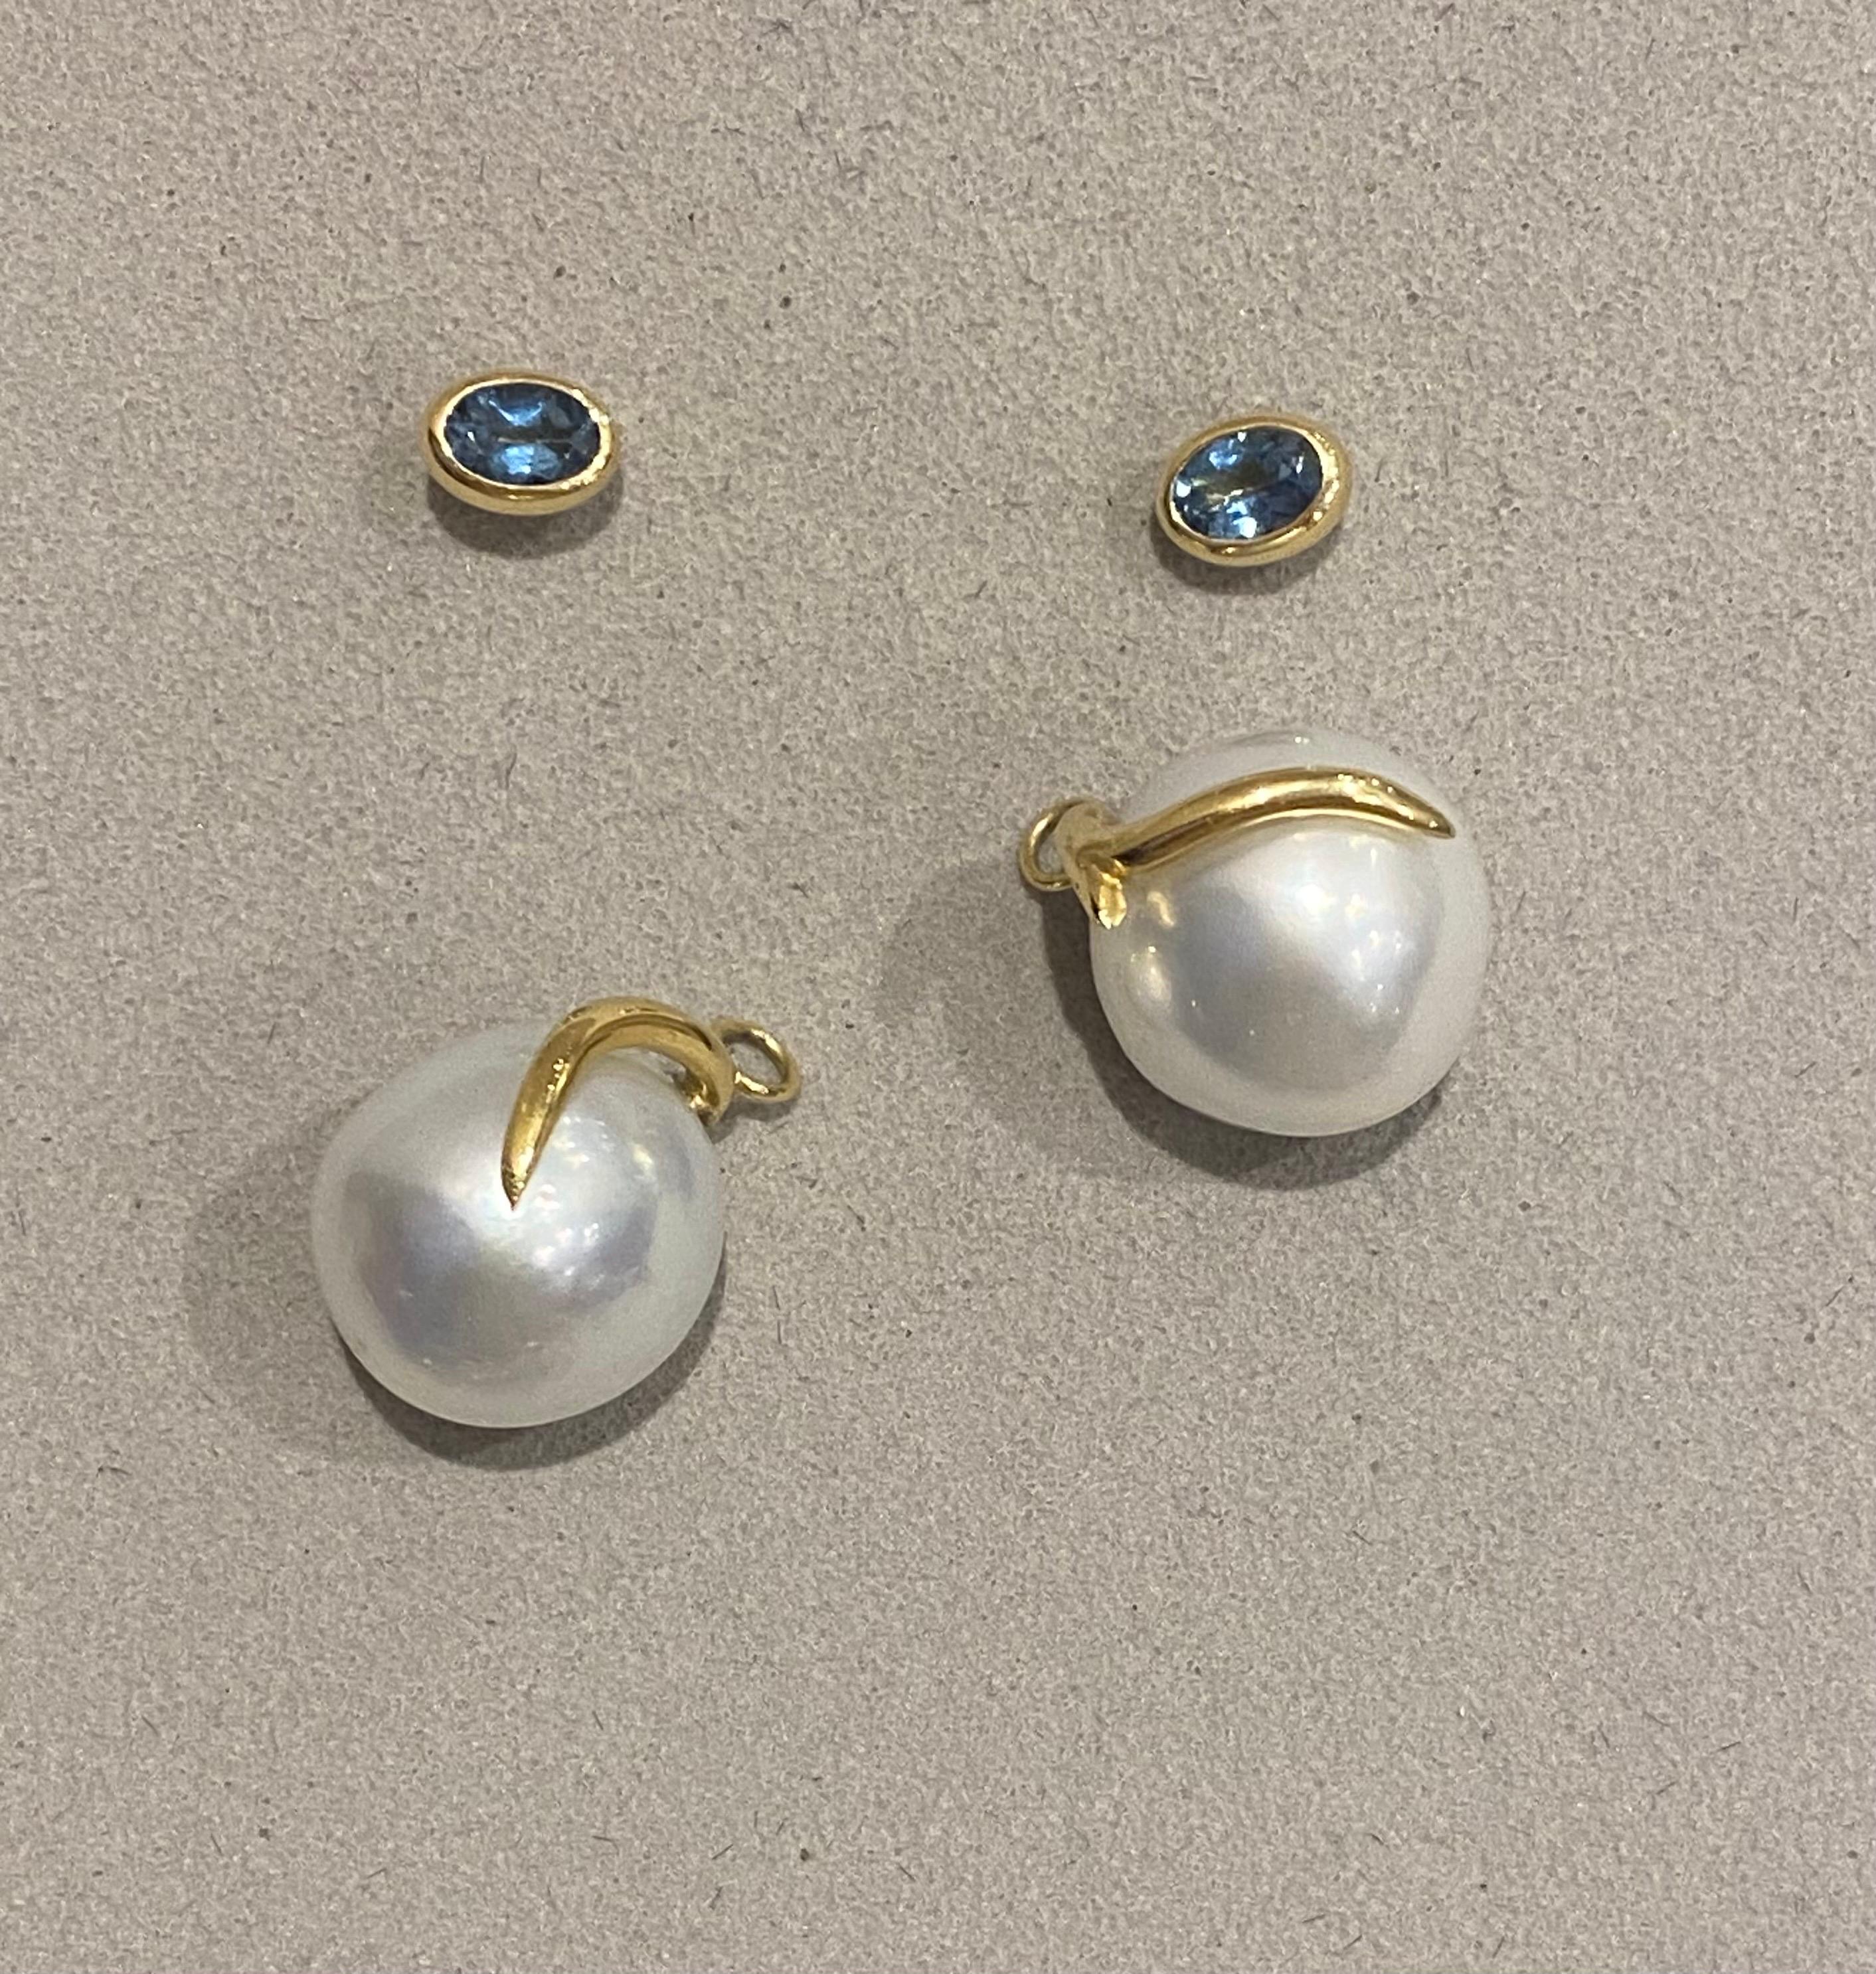 A Lilly Hastedt Signature pair of earrings with baroque South Sea Pearls and Santa Maria Aquamarines.  These earrings are in 18 Karat gold with an asymmetric design, from a collection inspired by coral twigs. The studs are detachable and can be worn